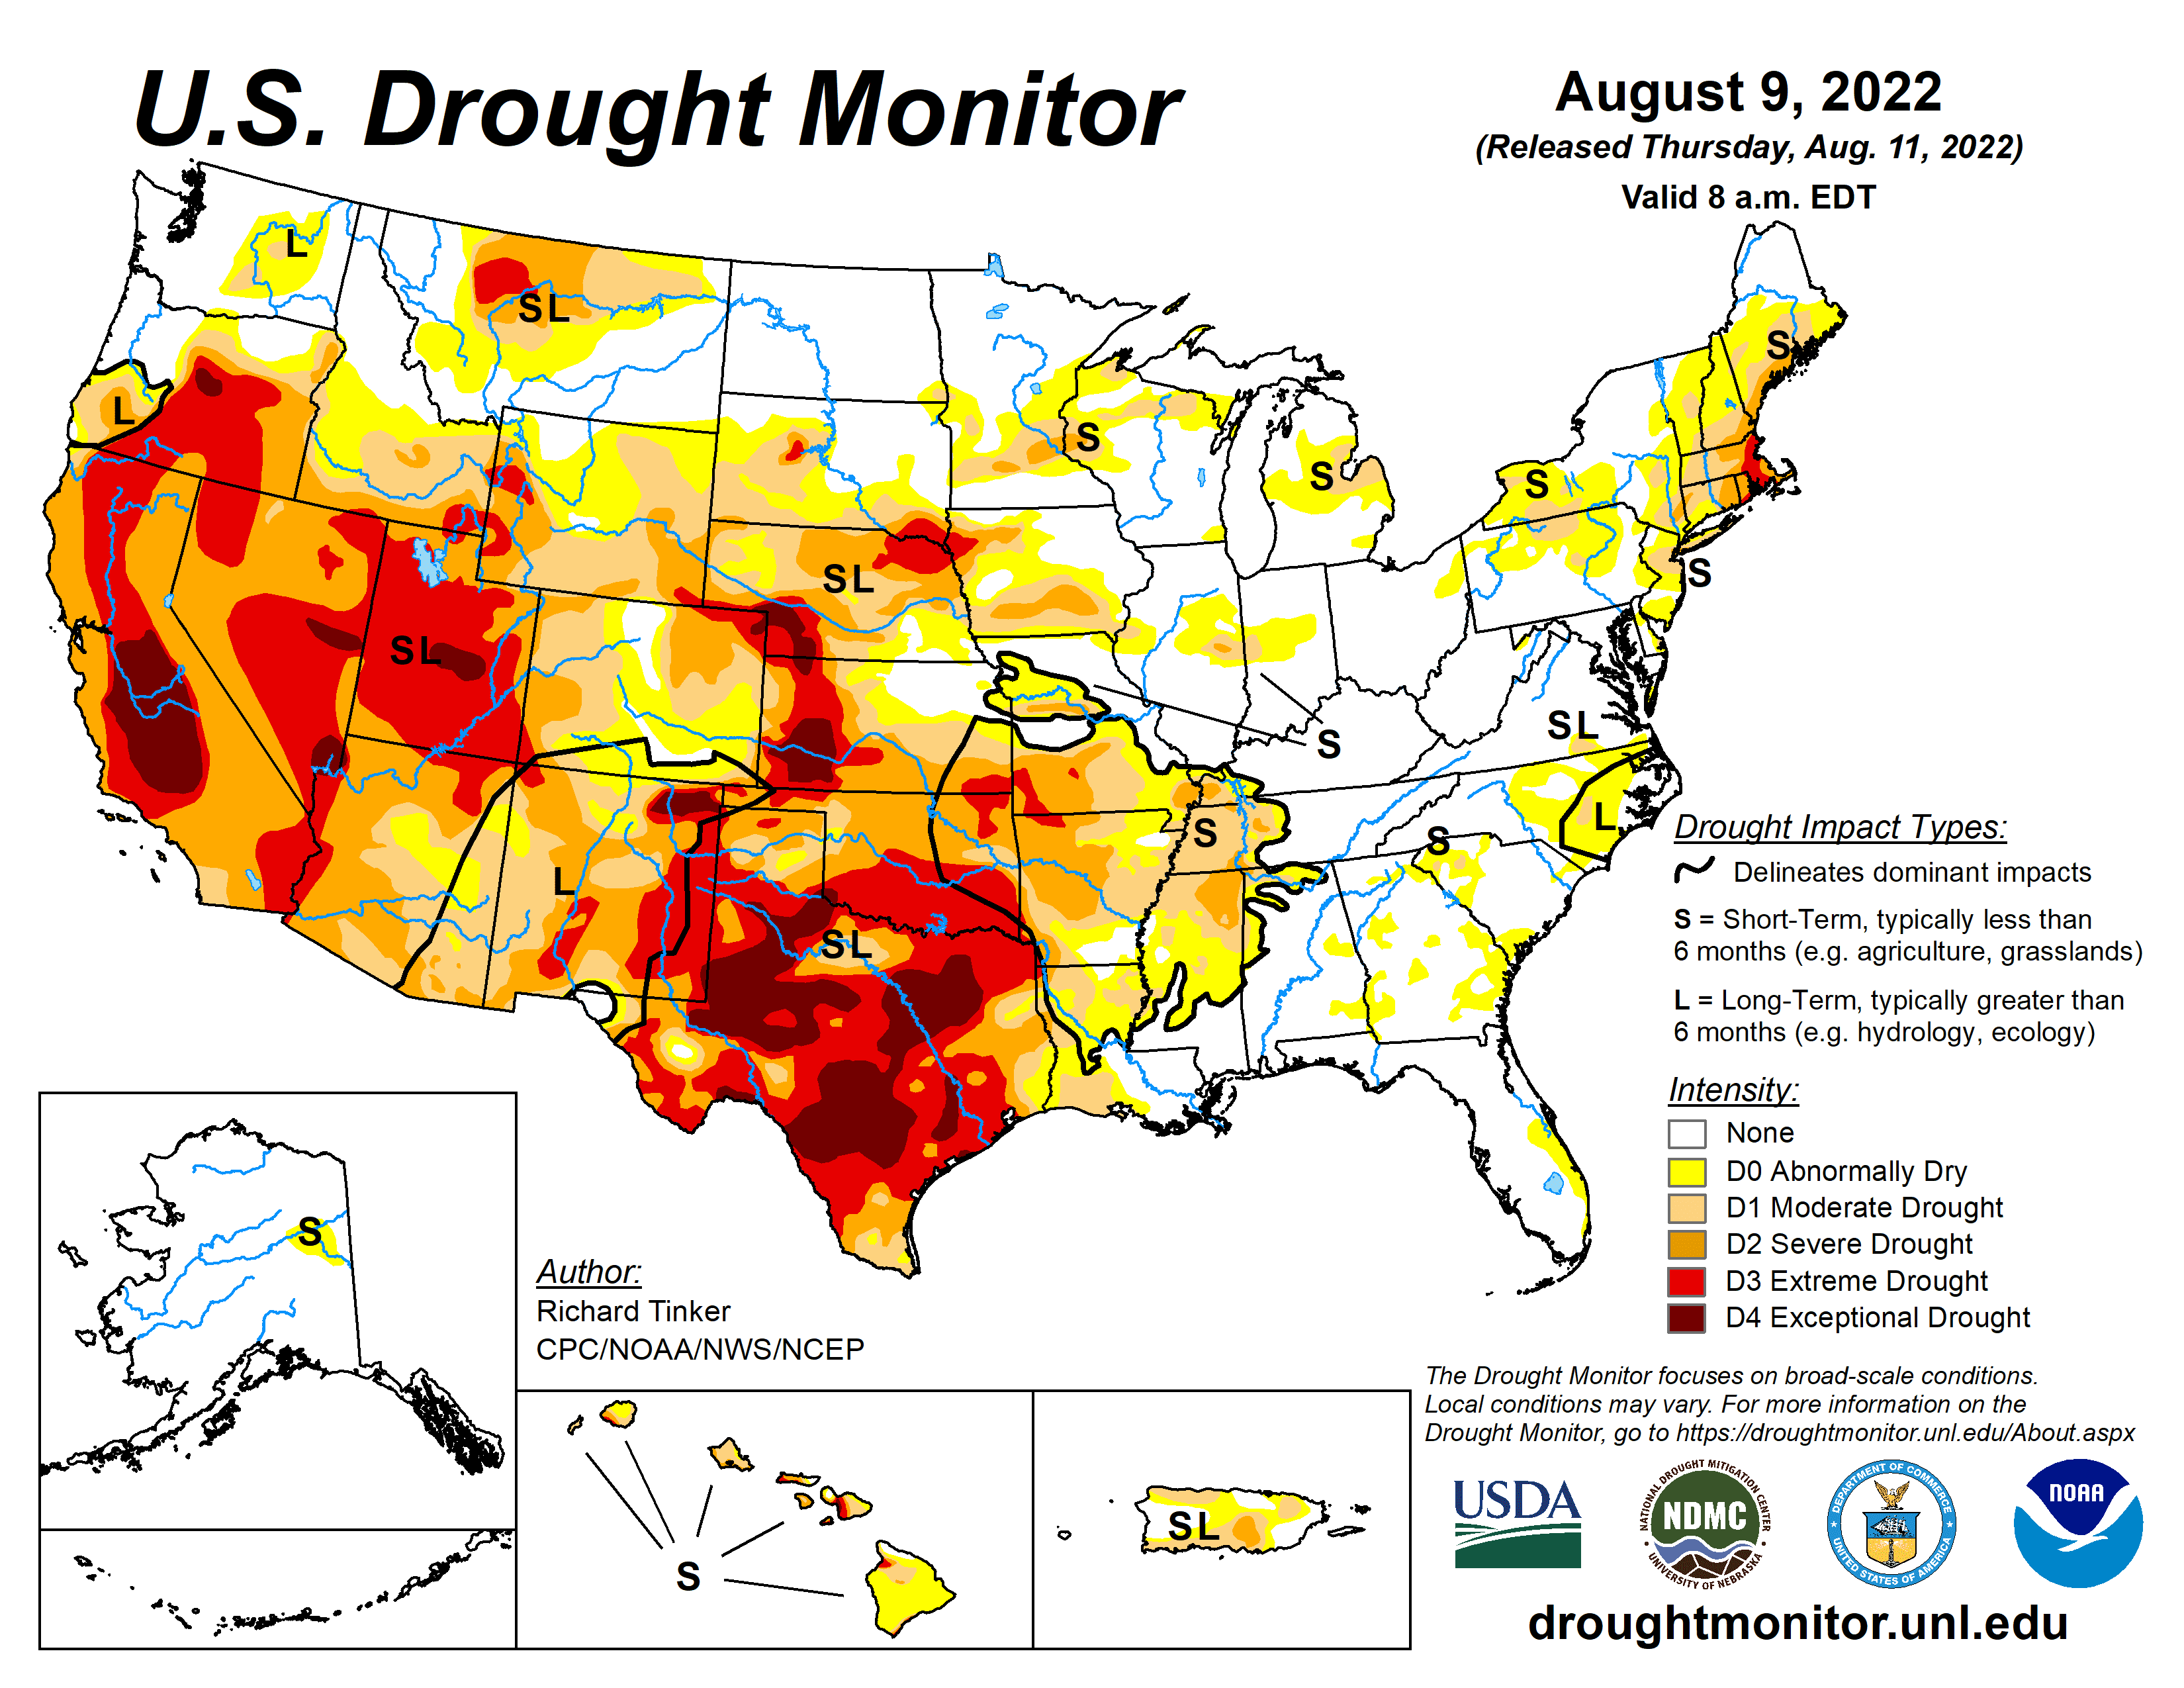 U.S. Drought Monitor Map released August 11, 2022